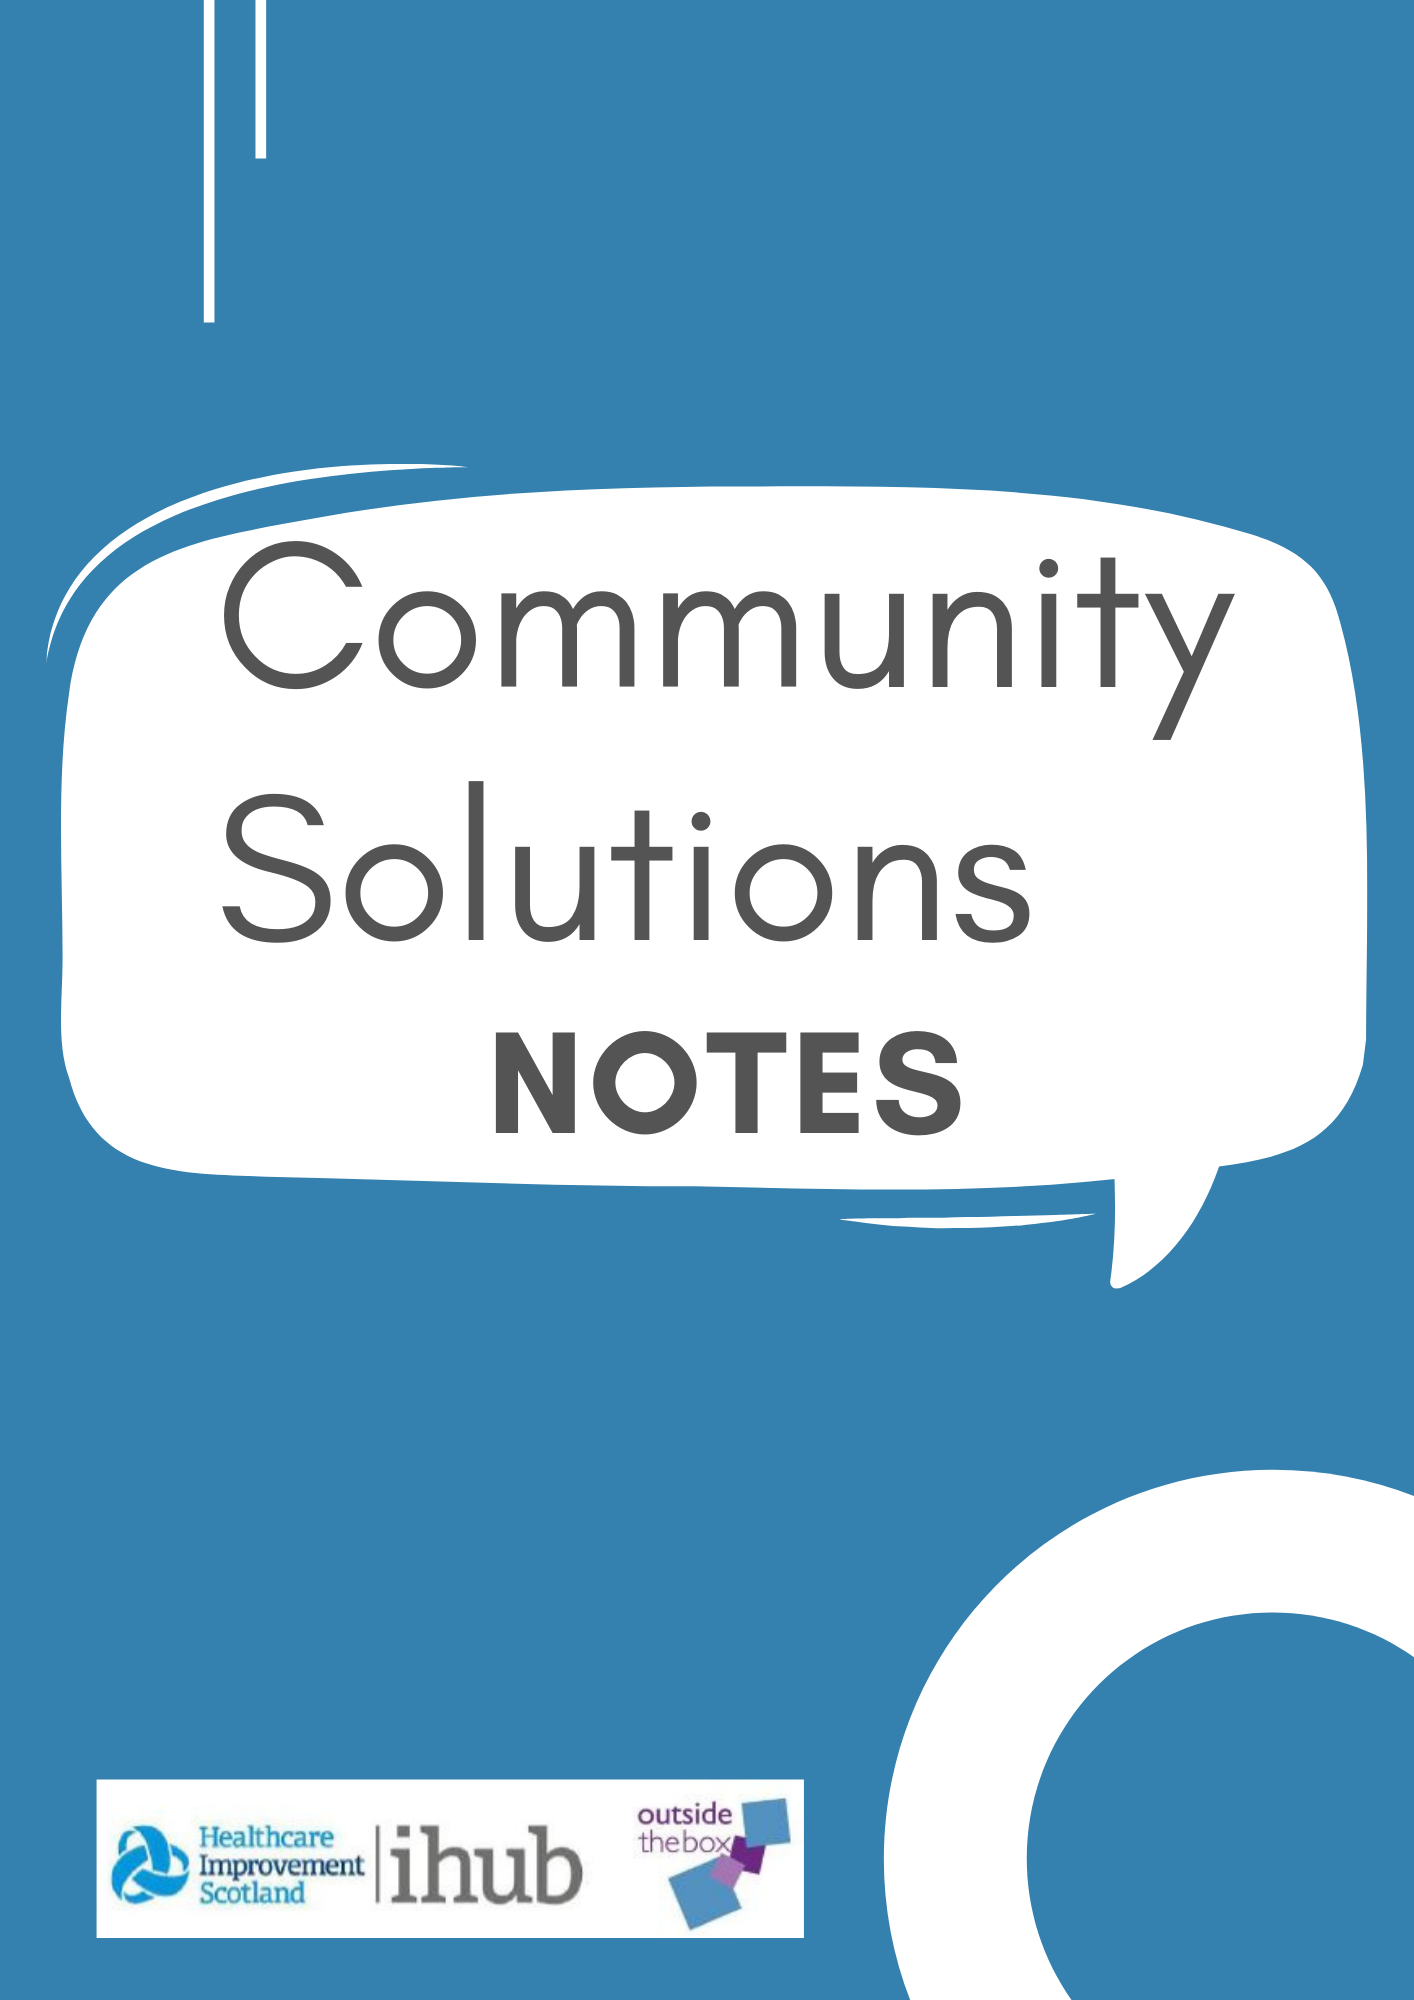 Community Solutions notes